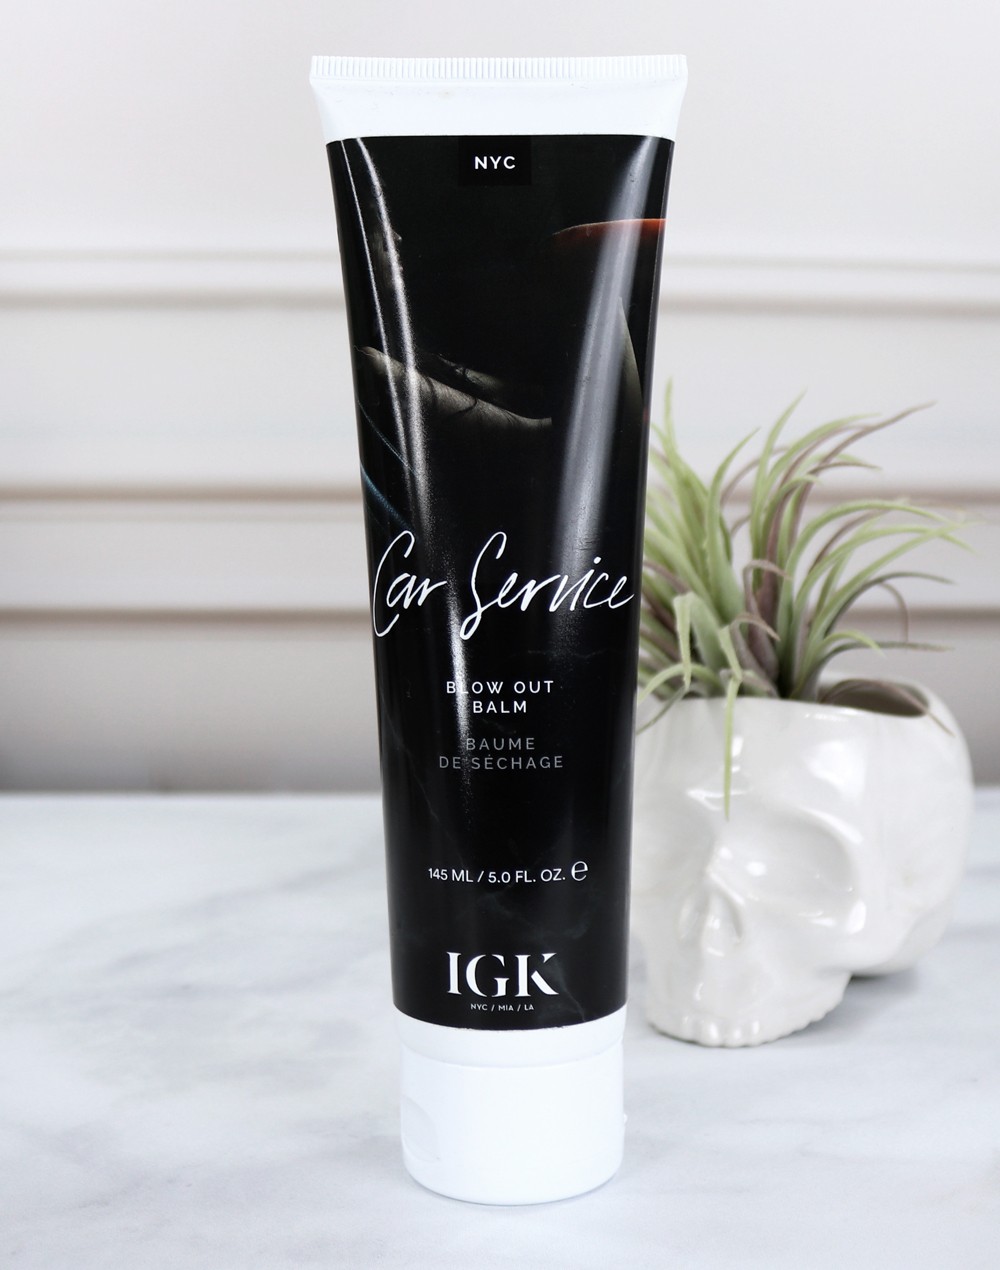 IGK Car Service Blow Out Balm Review - IGK Cruelty Free Hair Product Hits and Misses by popular Los Angeles cruelty free beauty blogger My Beauty Bunny